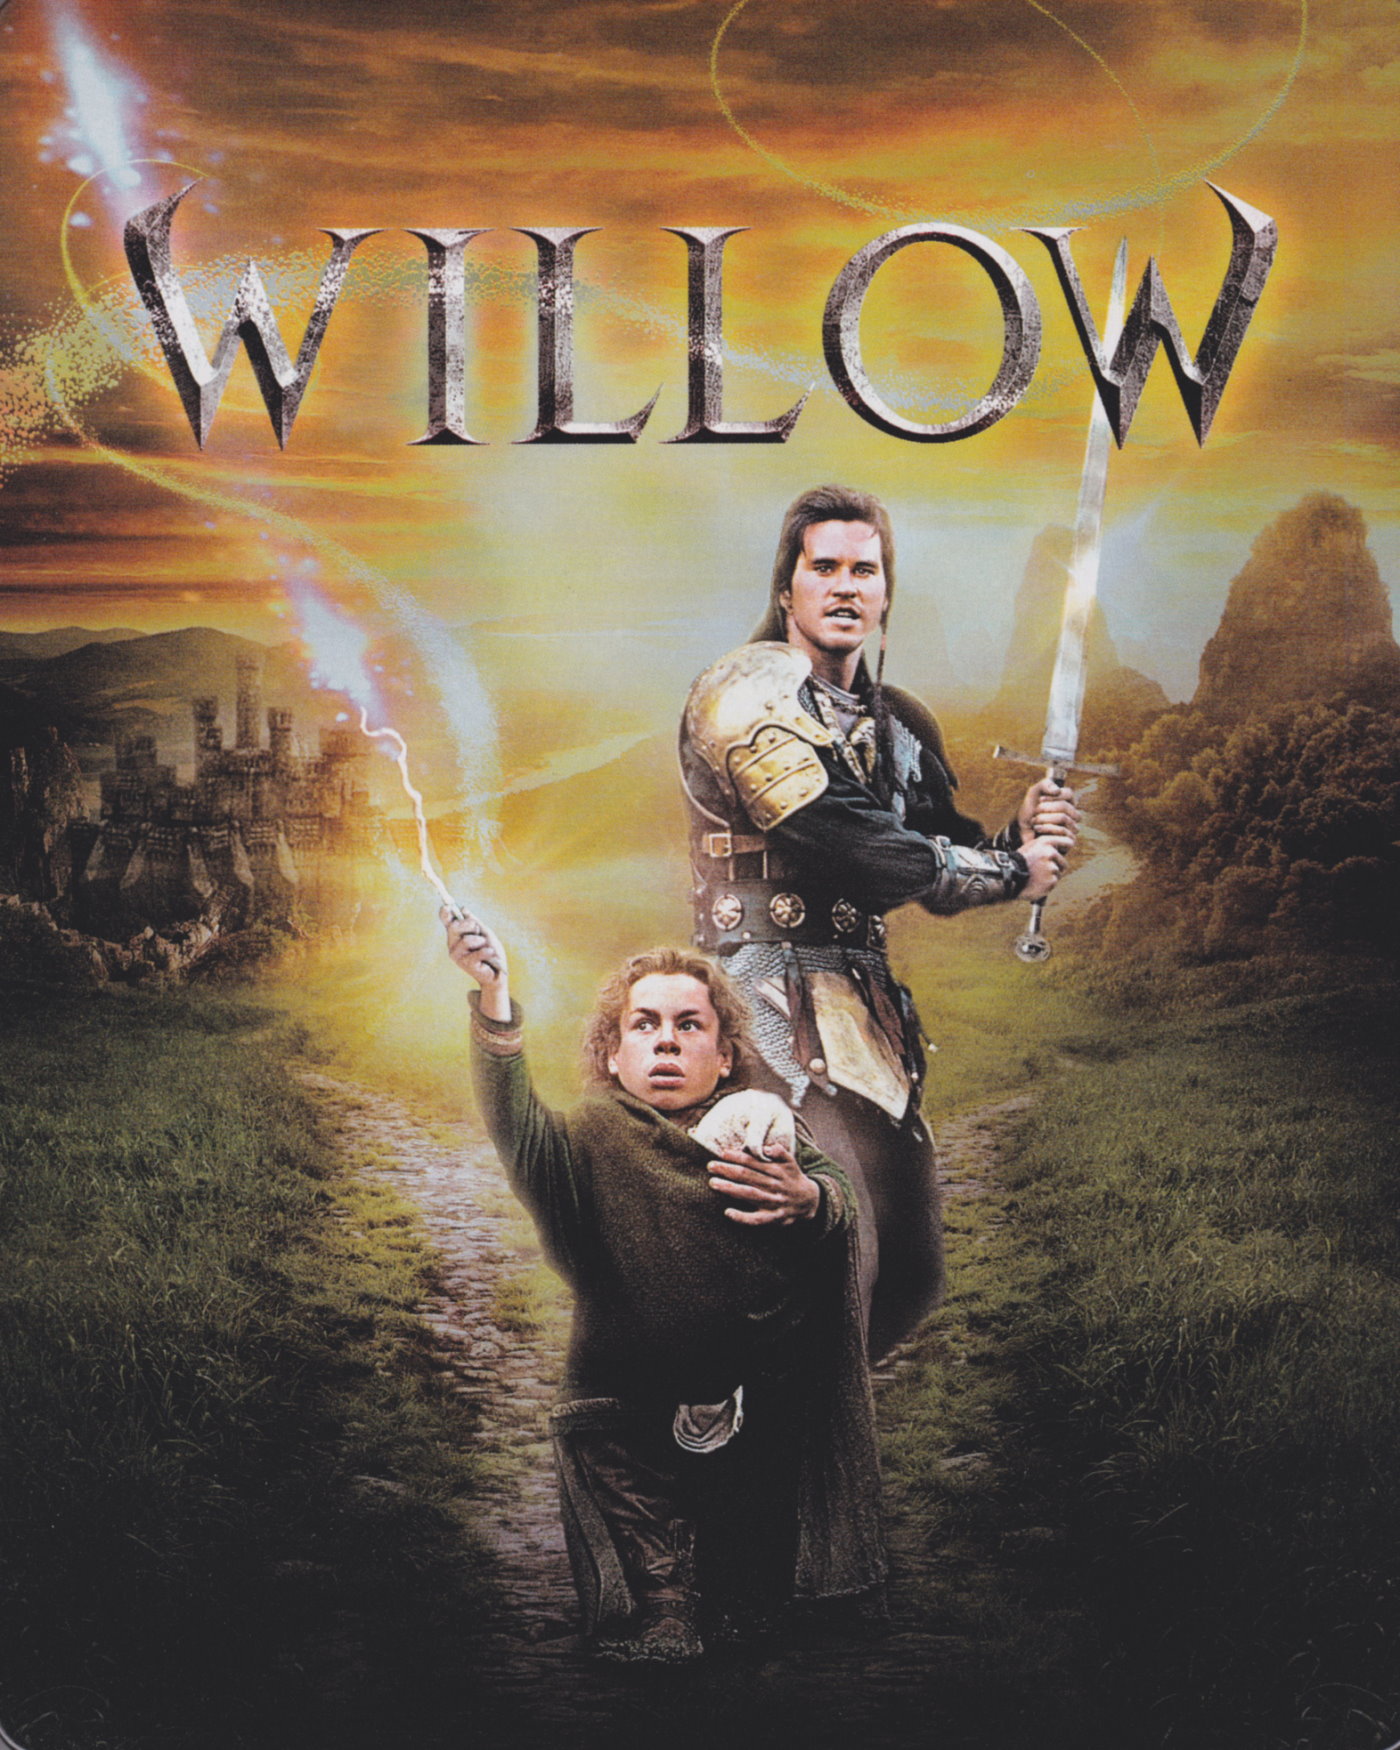 Cover - Willow.jpg